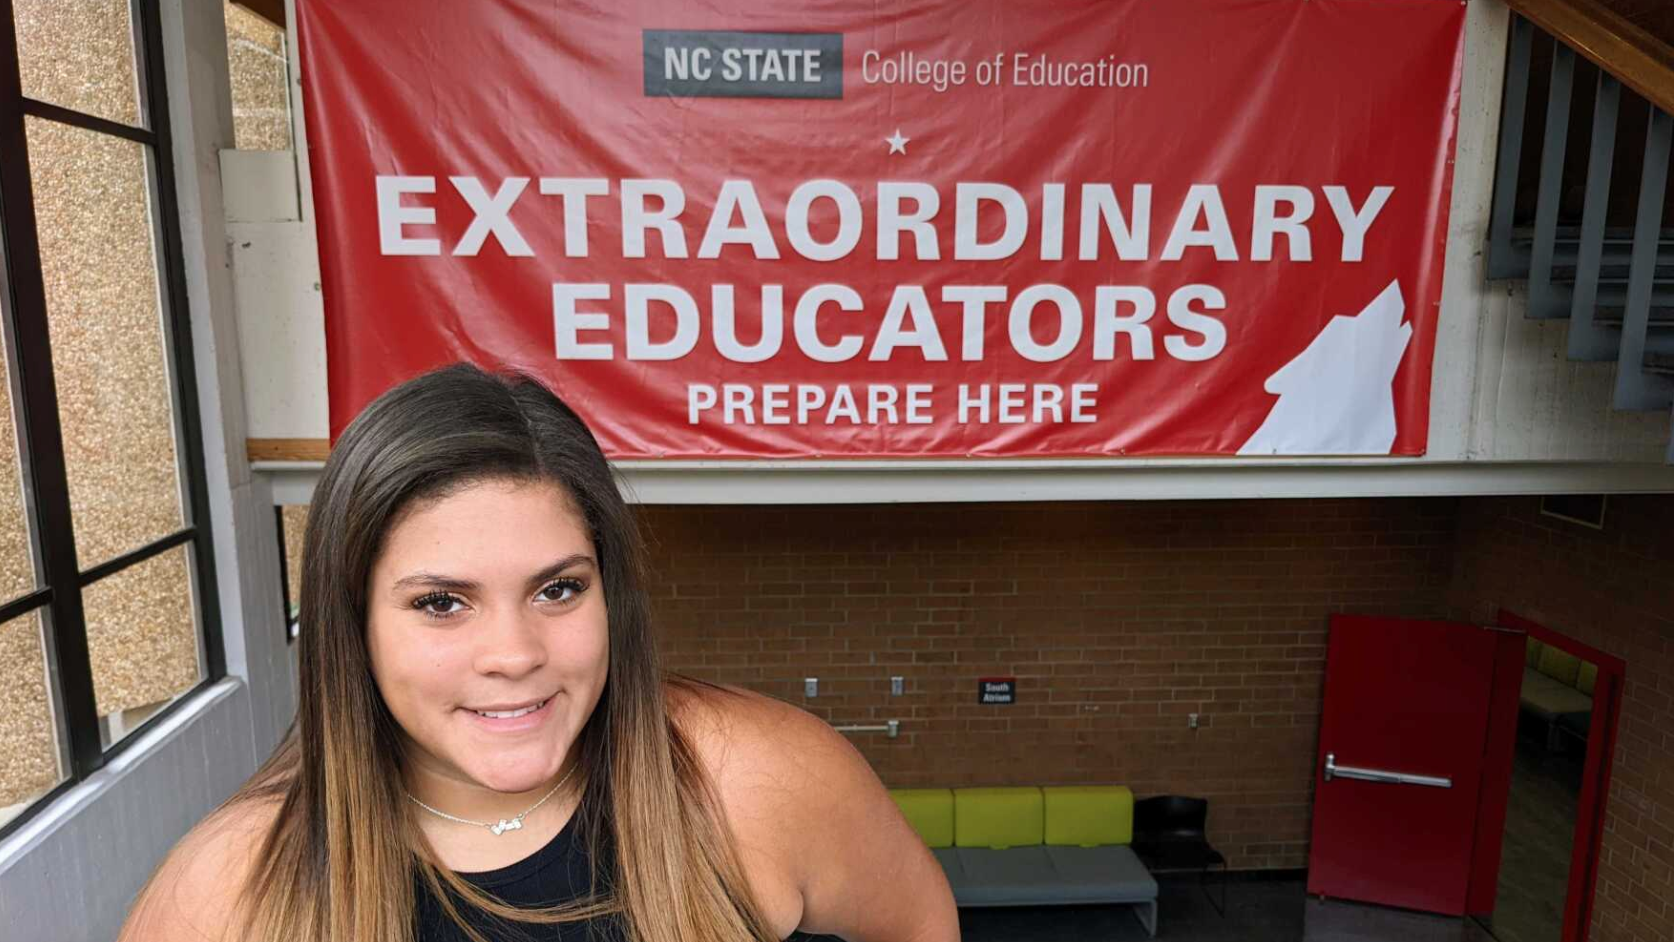 Alliyah Rich is a recent graduate of NC State's College of Education and an NC Teaching Fellow who will be employed as a middle school special education teacher in the fall.